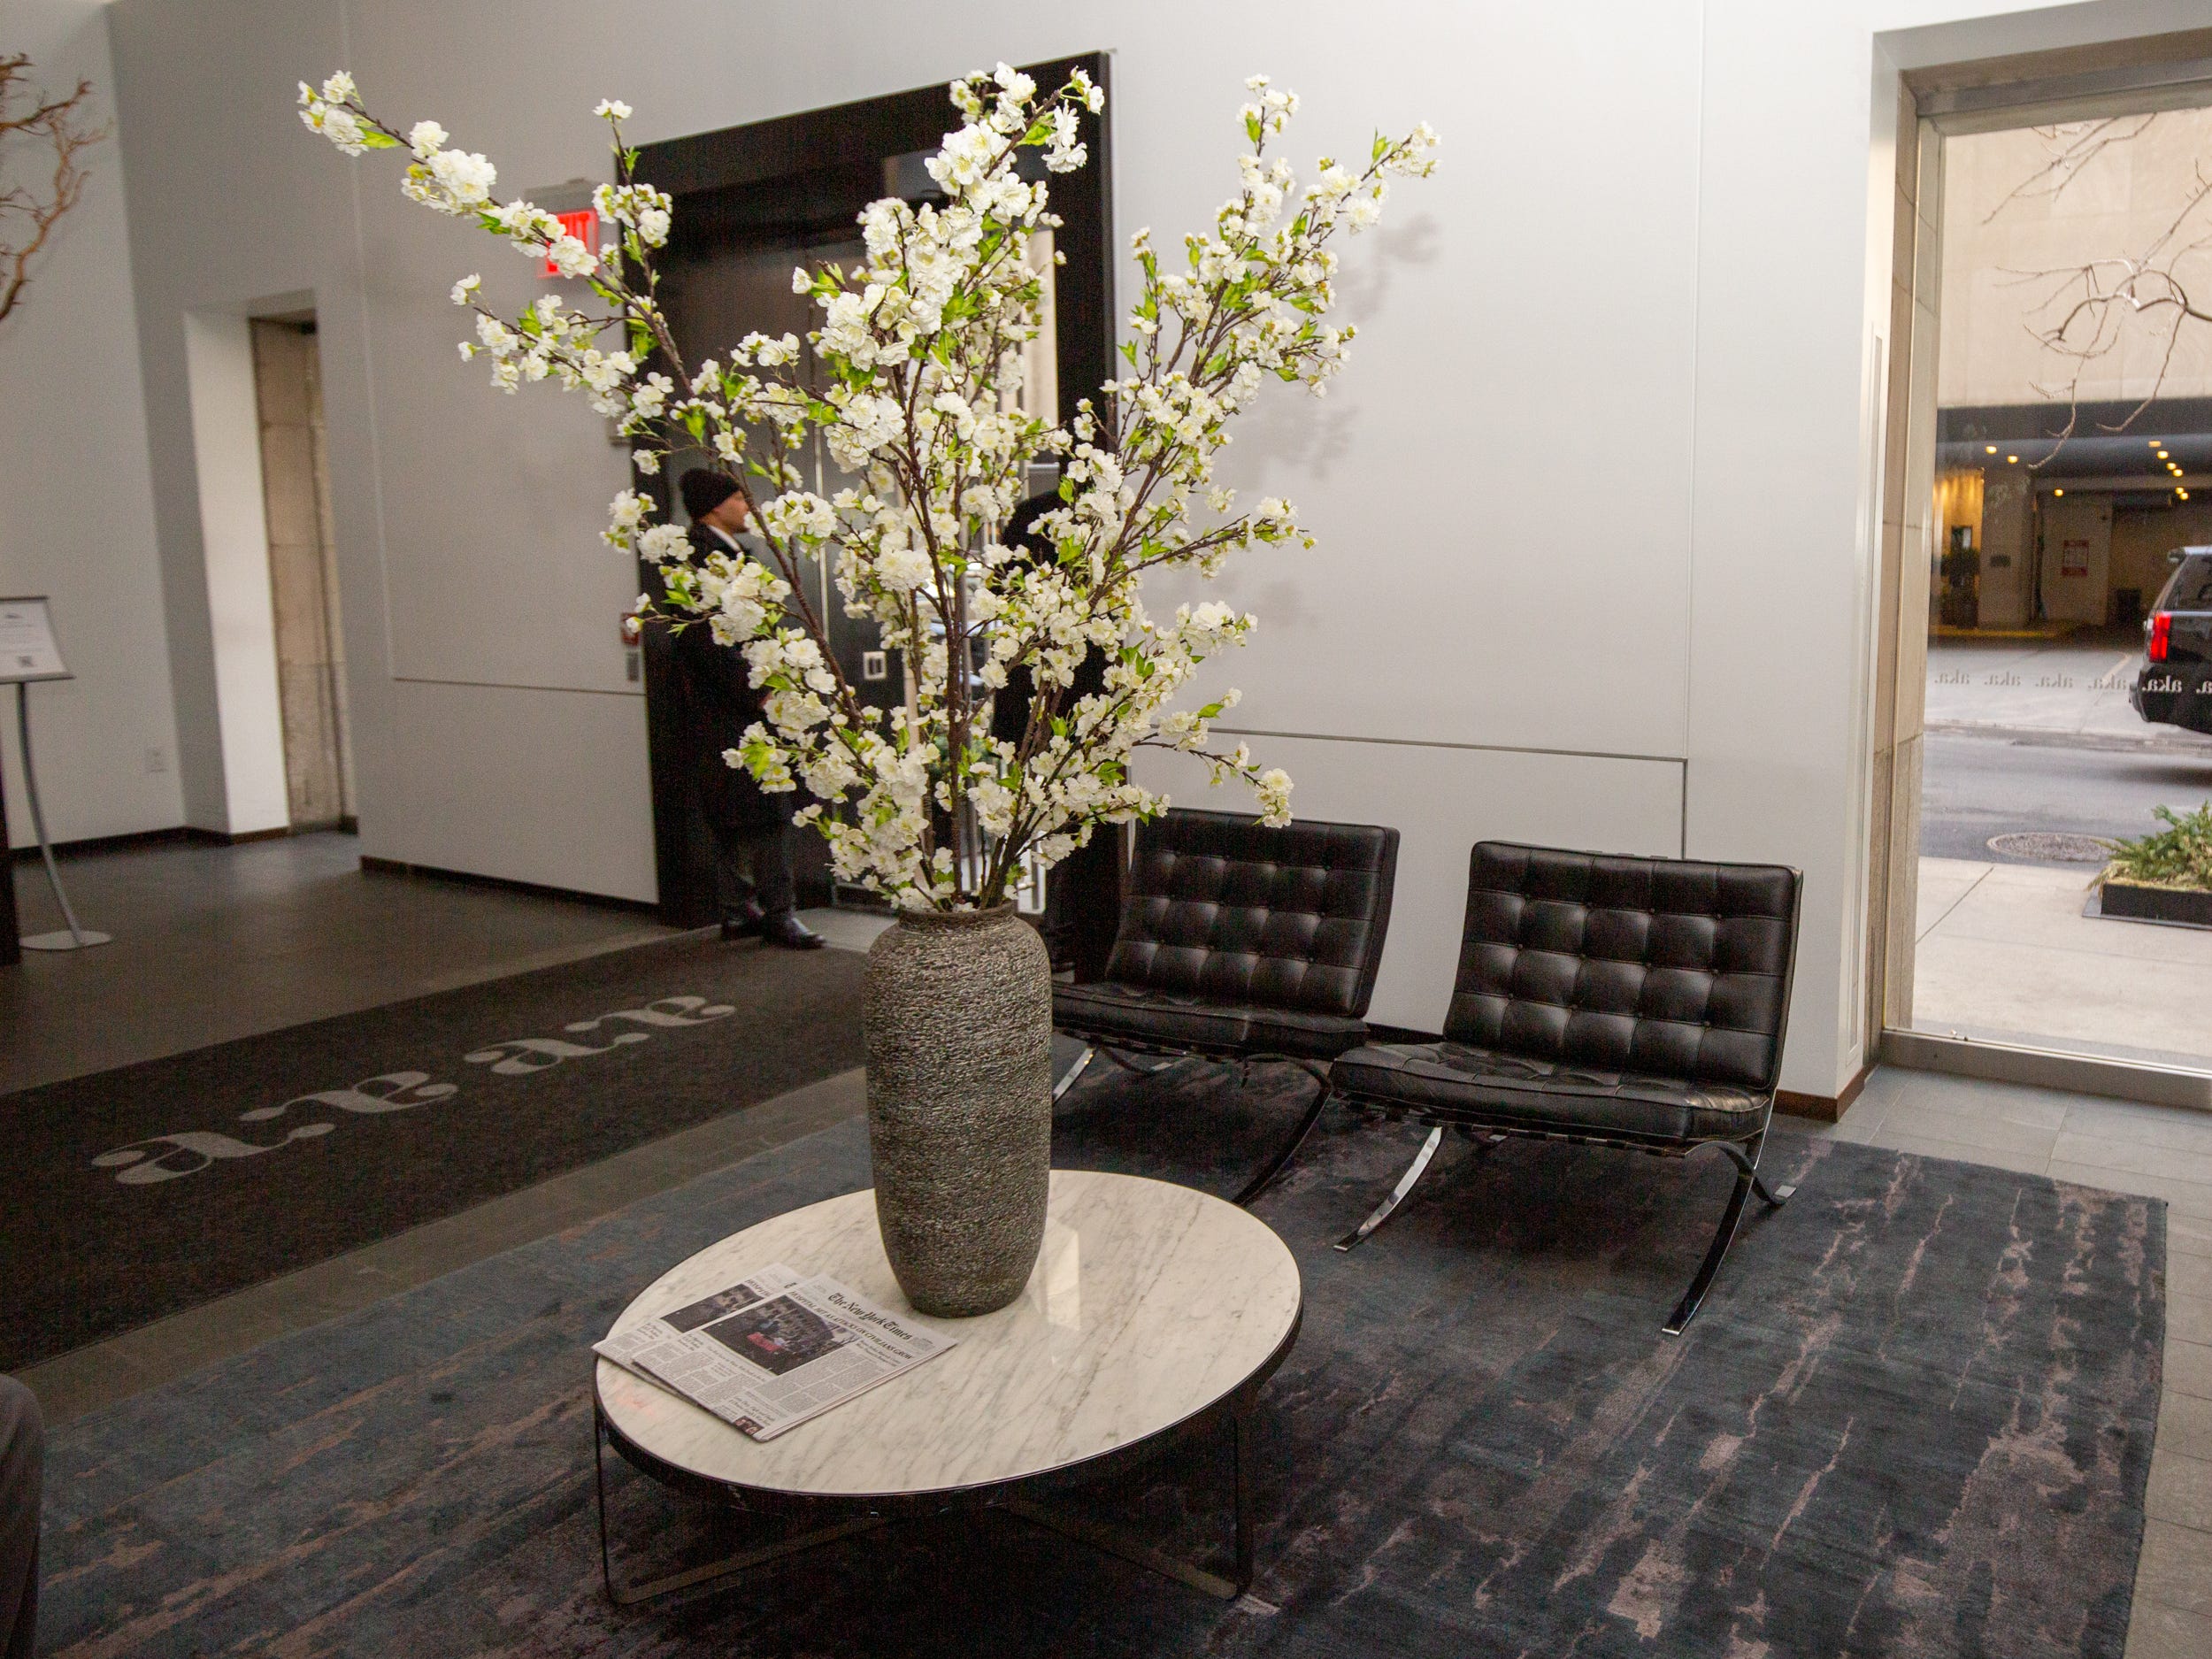 A vase with tall white plants on a table next to two lounge chairs.